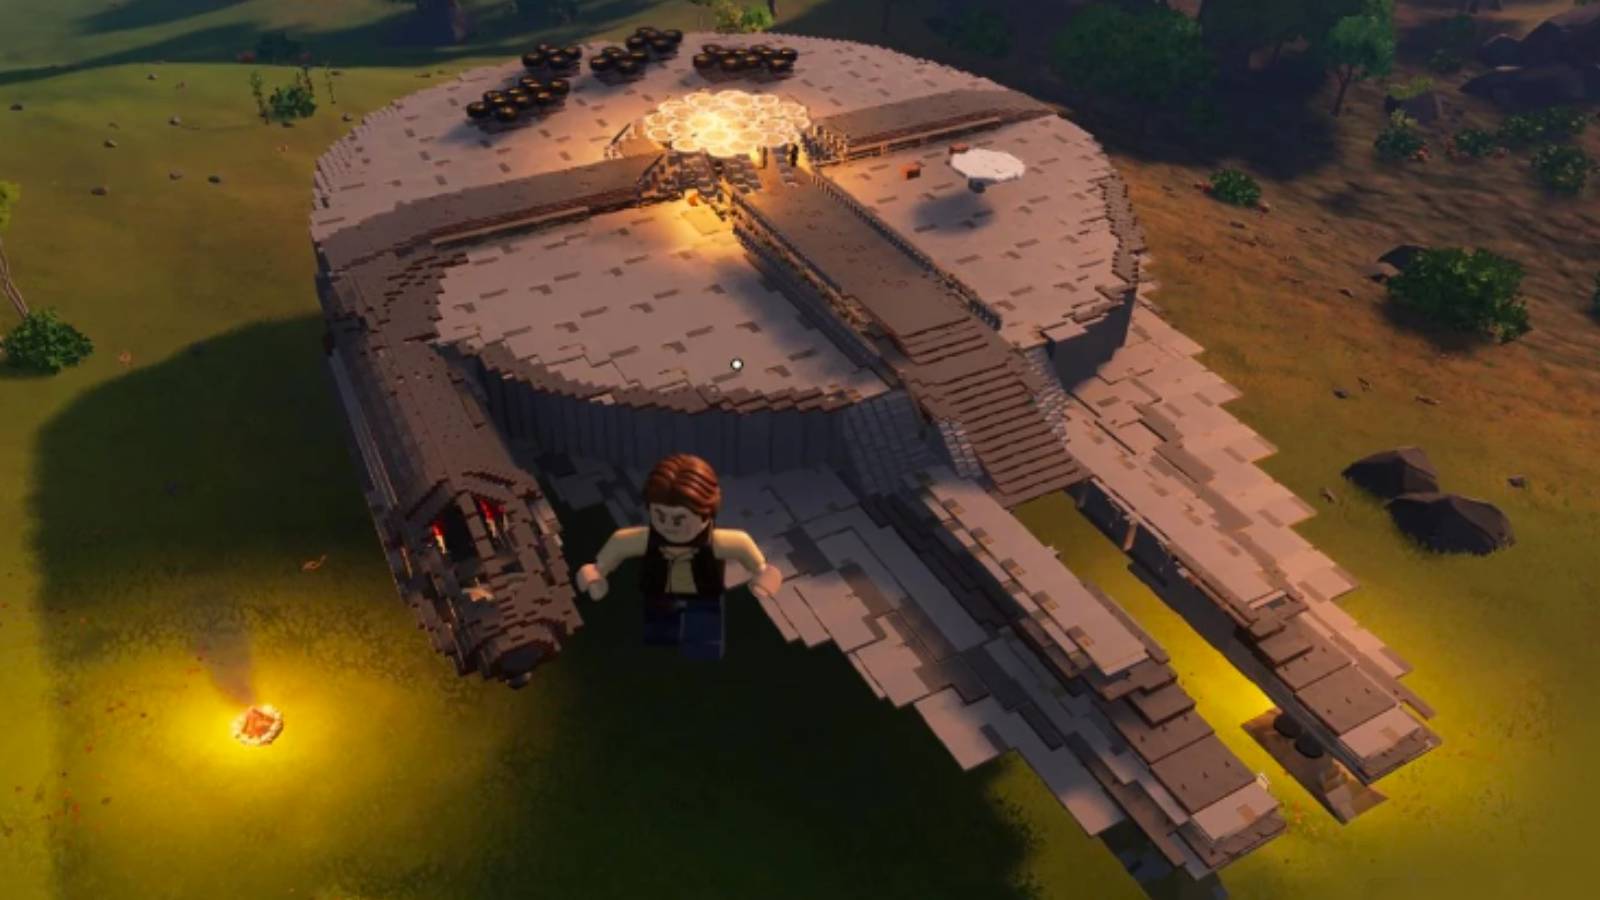 LEGO Fortnite player recreated the Millenium Falcon ship from Star Wars in the game.